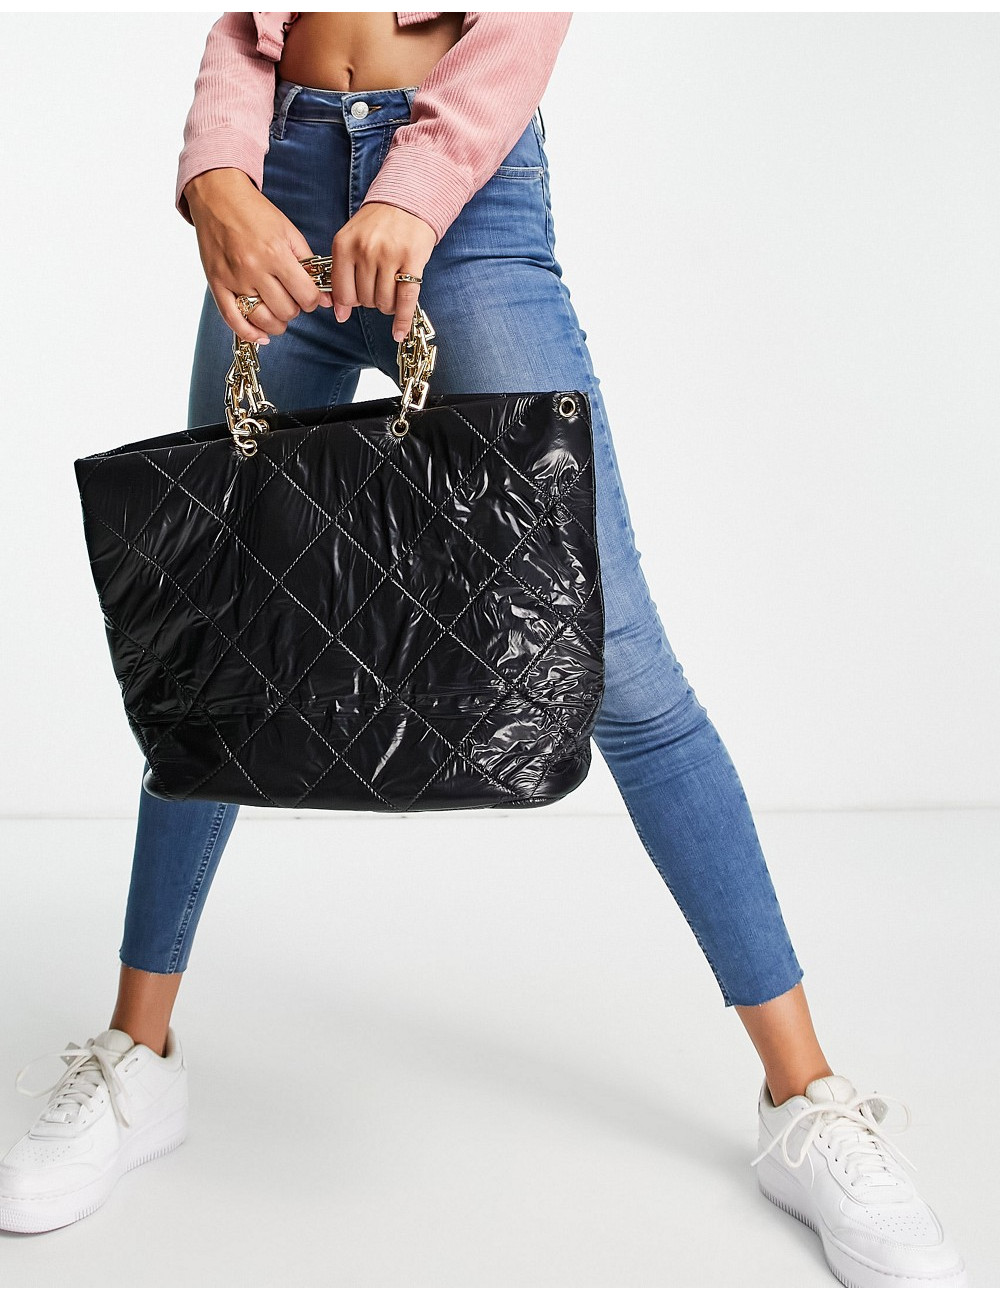 Ego quilted tote bag with...